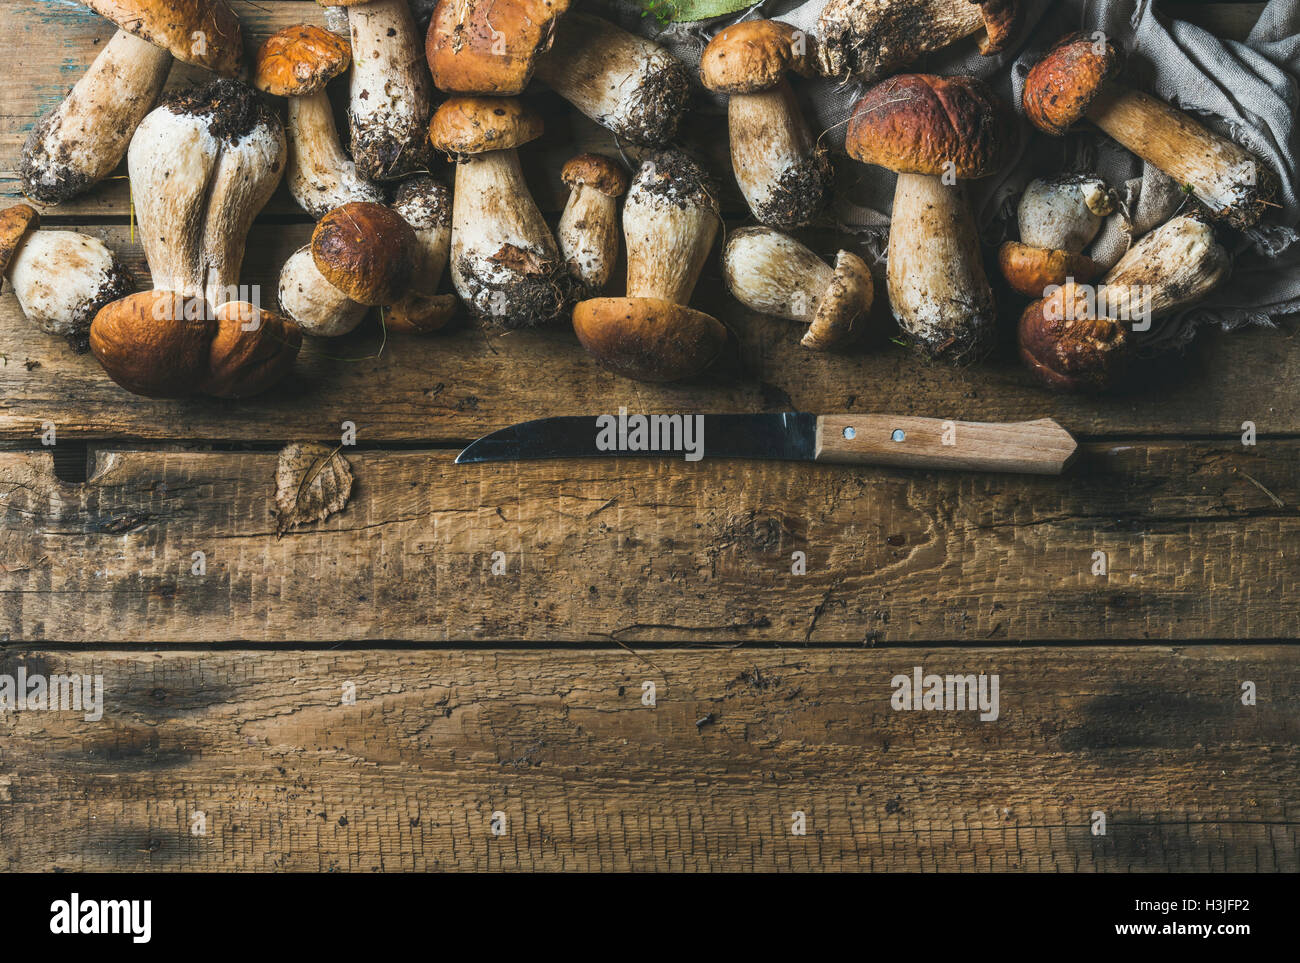 White forest mushrooms and knife on rustic wooden background, top view, copy space, horizontal composition Stock Photo